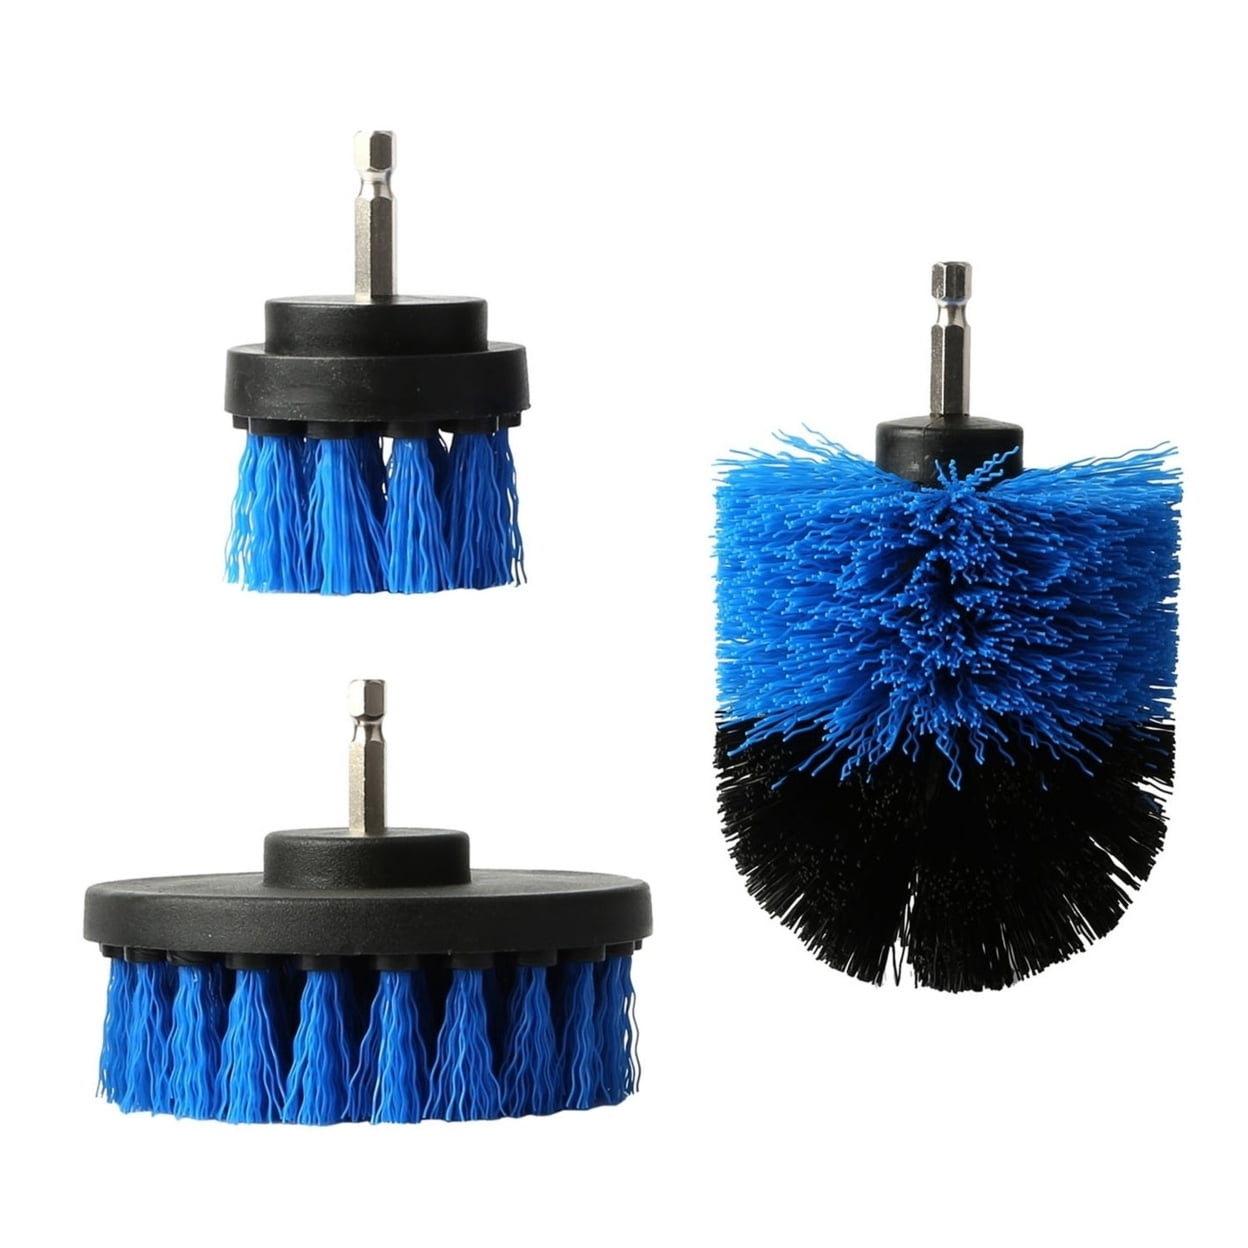 Fgy 10 Pcs Car Detailing Brush Kit for Auto Interior and Exterior Includes Detailing Brushes, Wire Brush & Air Vent Brush, Cleaning Towel, Size: Large